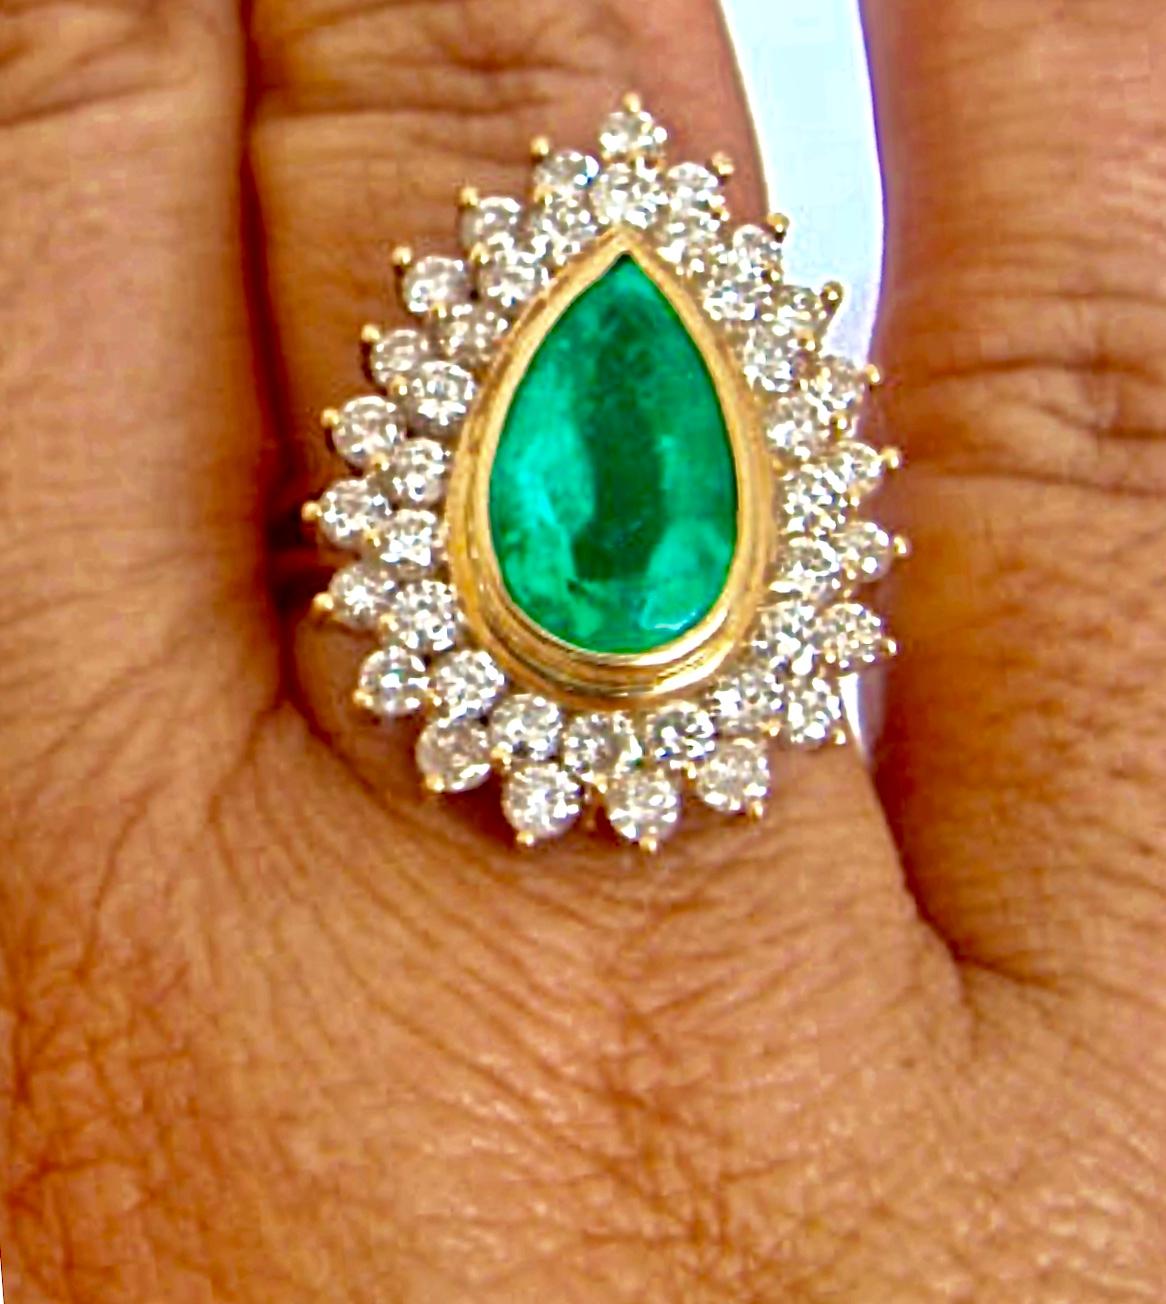 This is a fine natural Colombian emerald pear cut weighing 6.00 carats, vivid medium green color, excellent clarity, and transparency. Second stone, natural round brilliant cut diamonds weighing approx. 2.00 carats, clarity SI1-SI2 / color H-G
Total